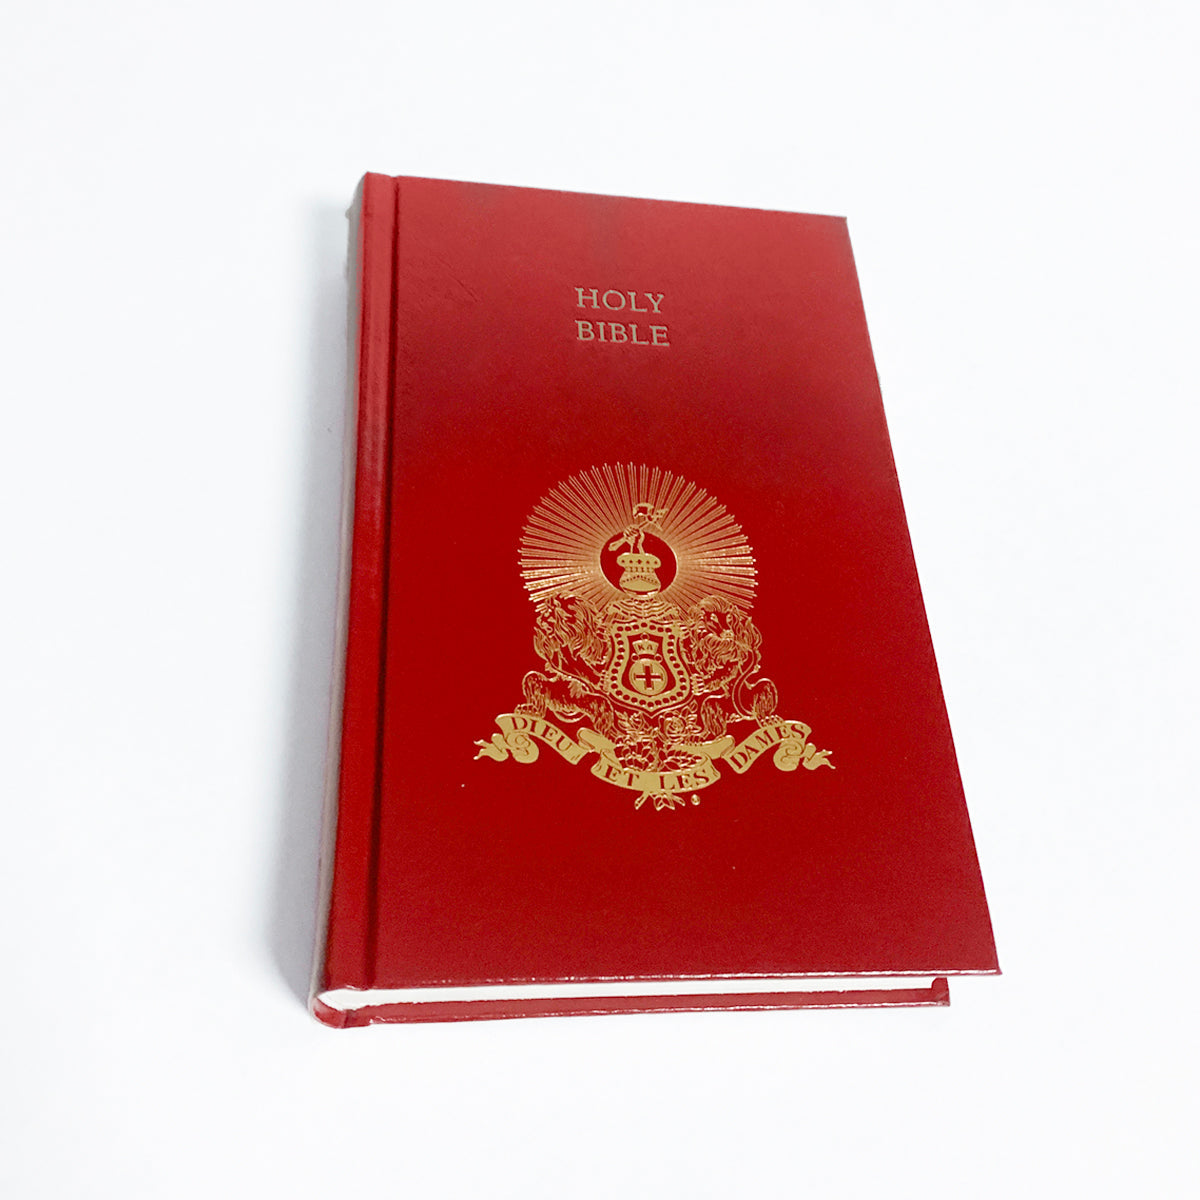 Kappa Alpha New Member Packet With Bible